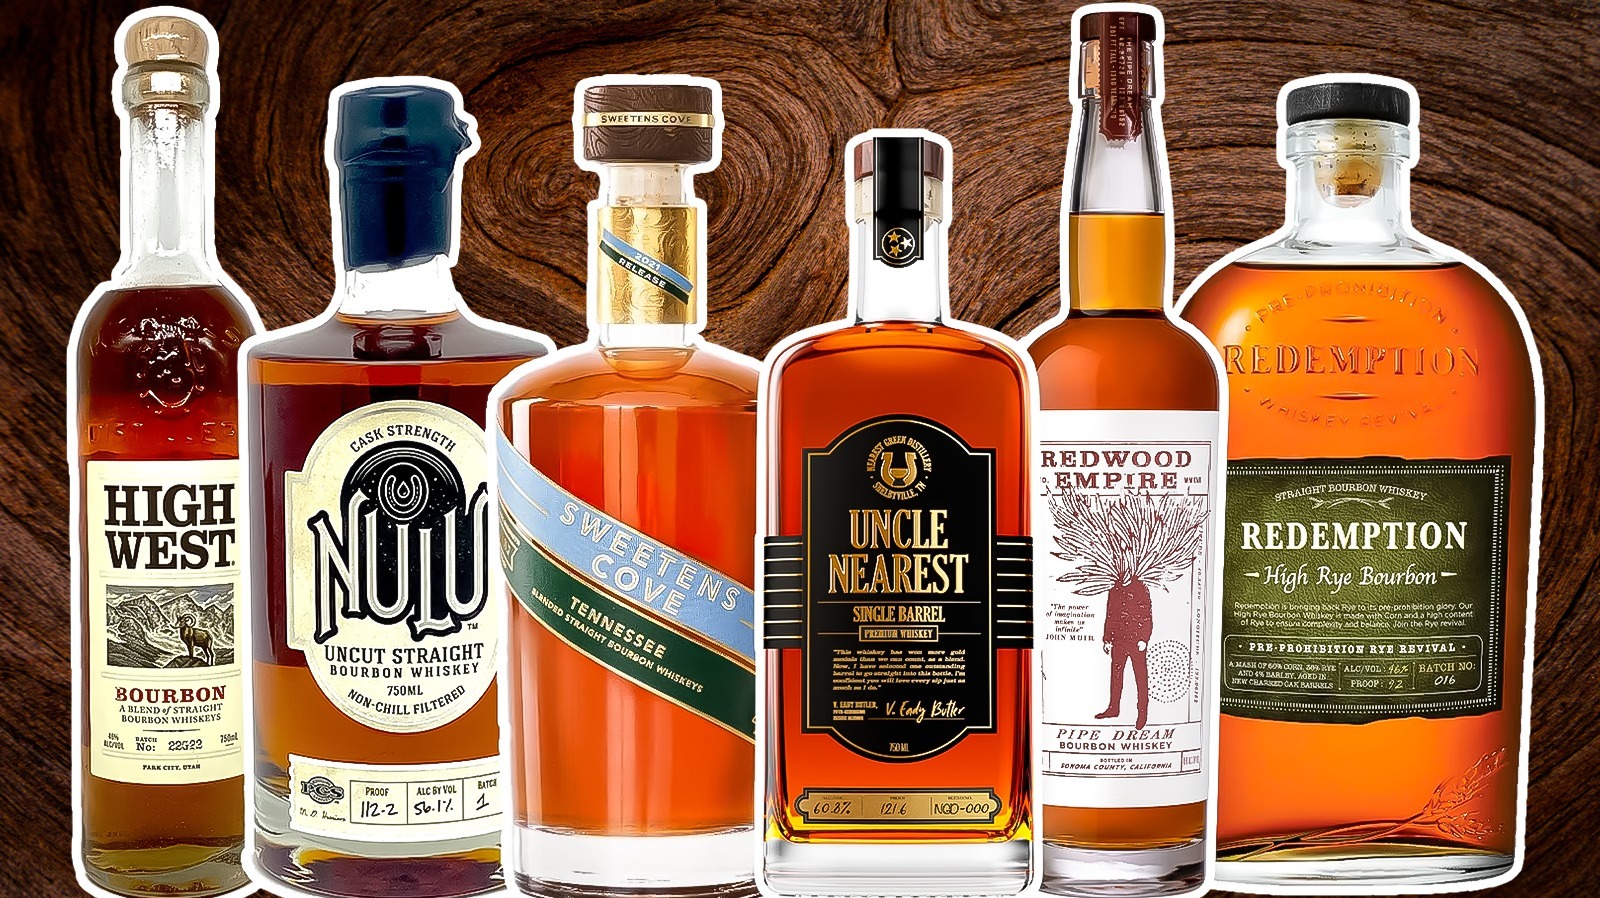 https://www.tastingtable.com/img/gallery/19-sourced-bourbons-you-should-consider-trying/l-intro-1686680885.jpg